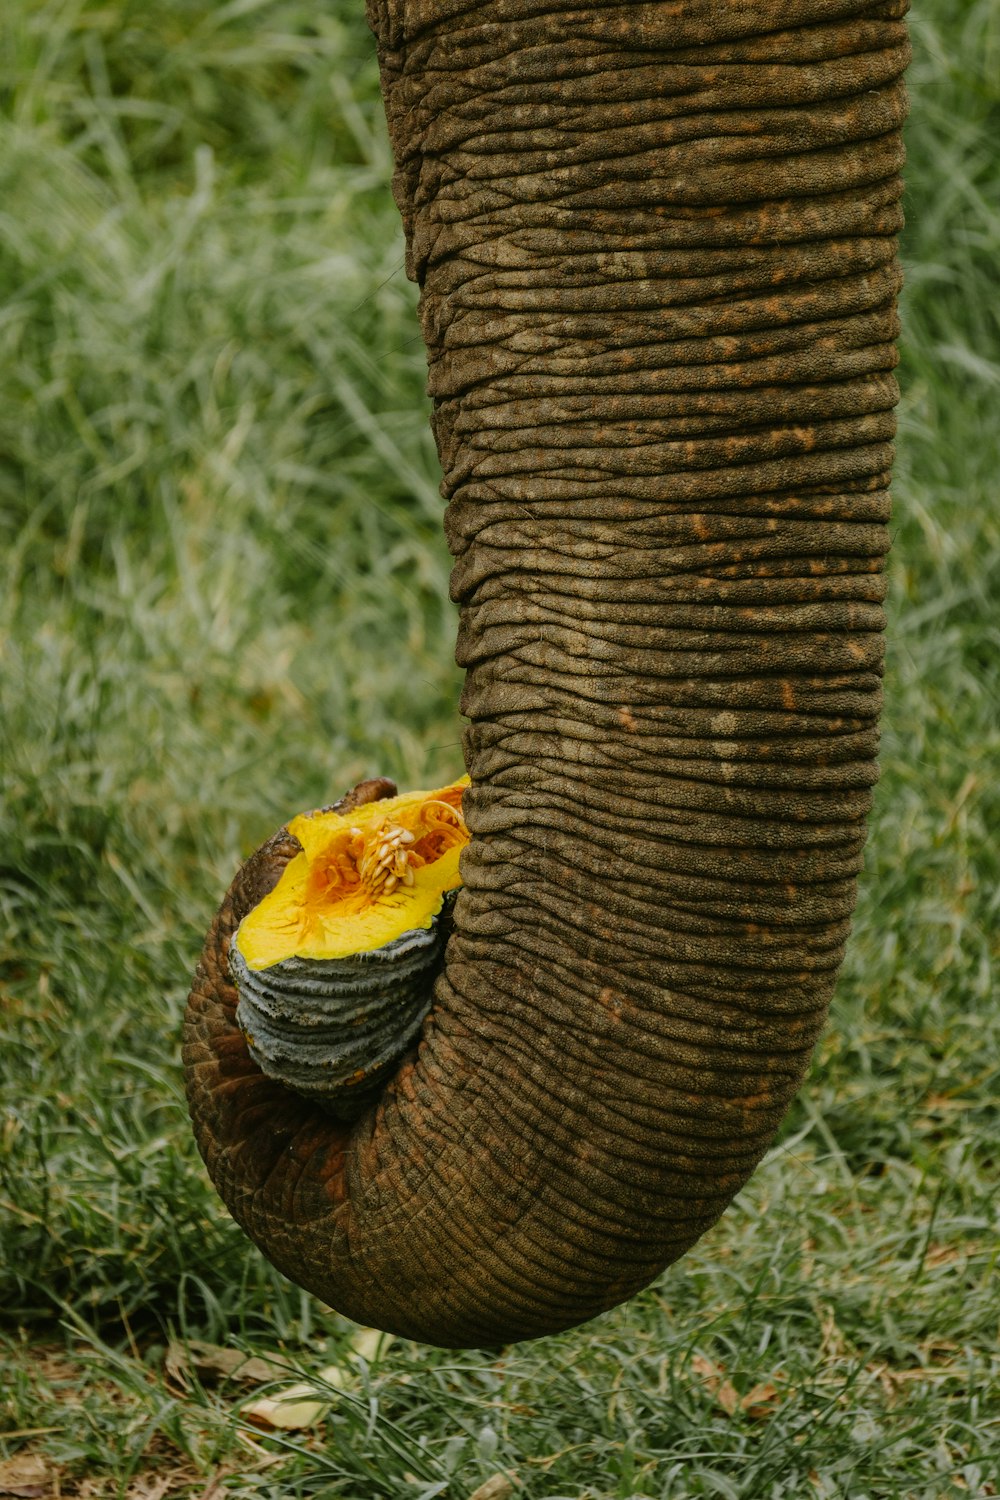 a close up of an elephant's trunk with a piece of fruit on it